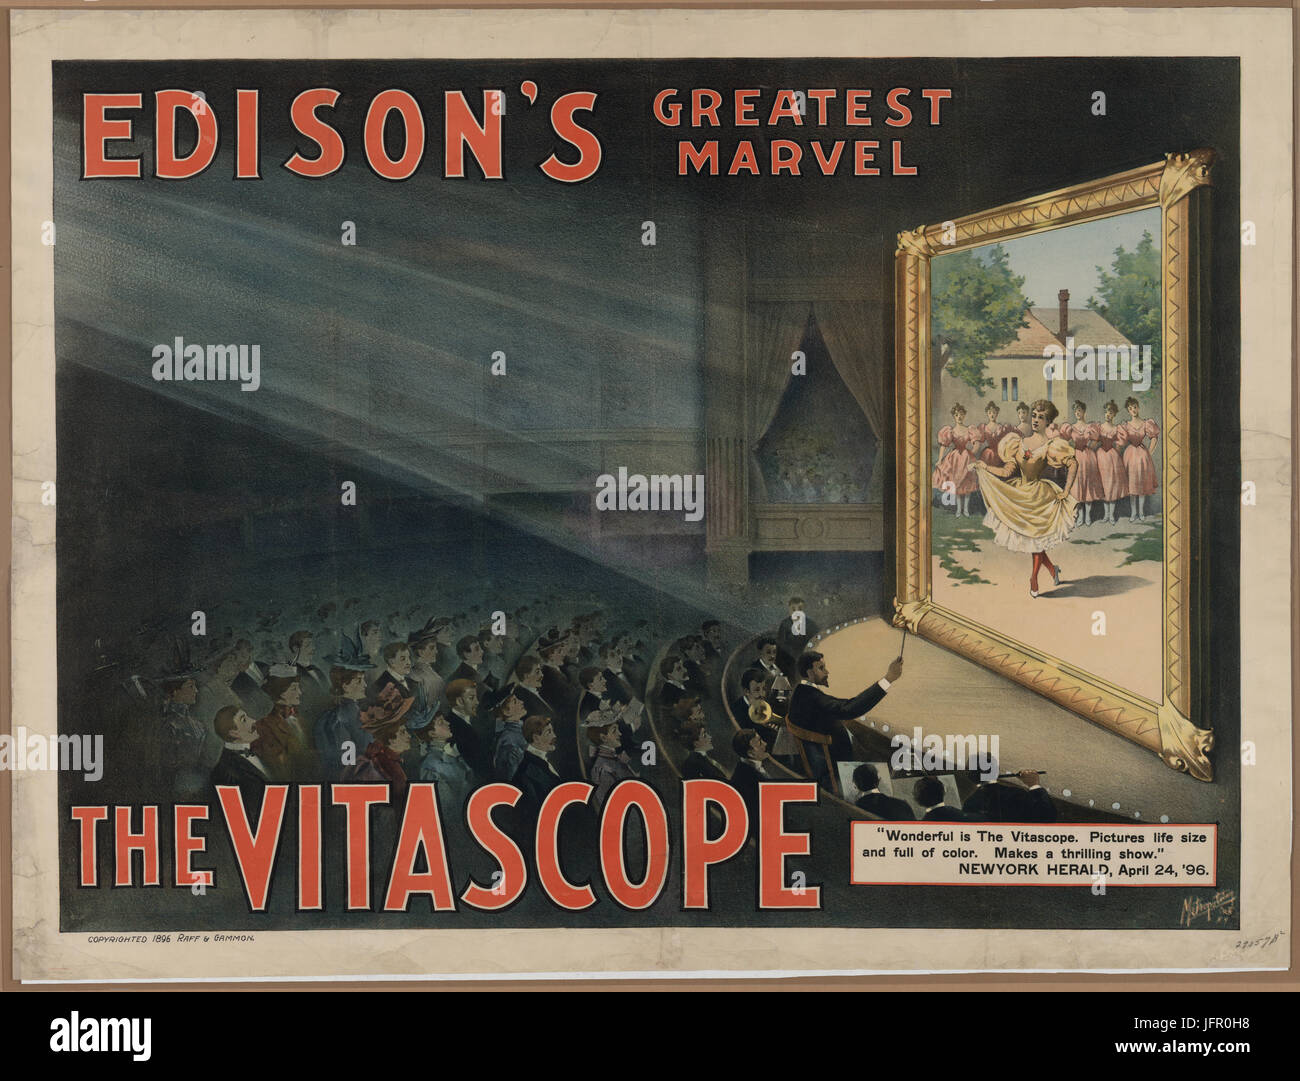 Motion picture poster for 'Edison's greatest marvel--The Vitascope' show movie audience watching large screen with woman dancing on screen and others in background watching. 1896 Stock Photo